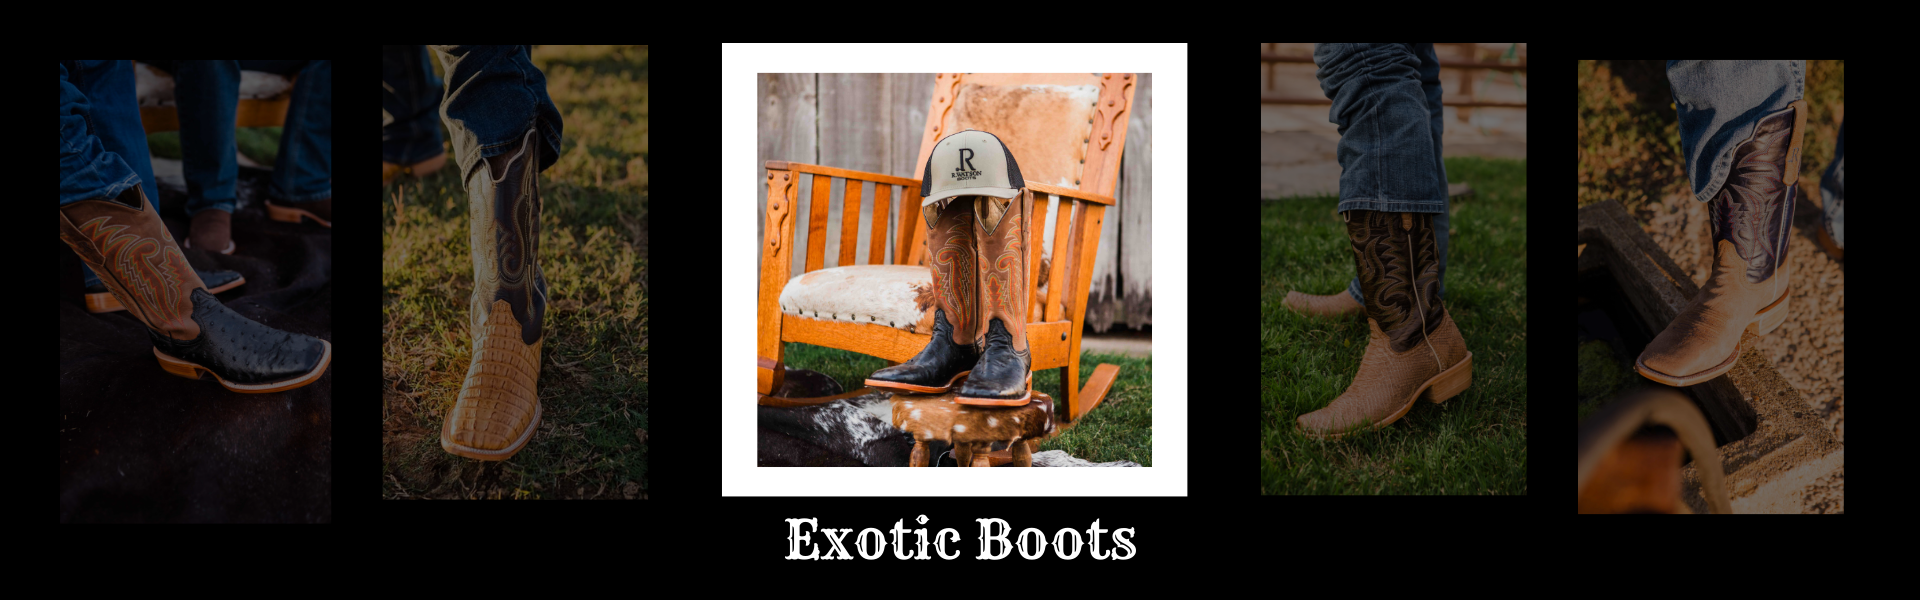 Exotic Boots